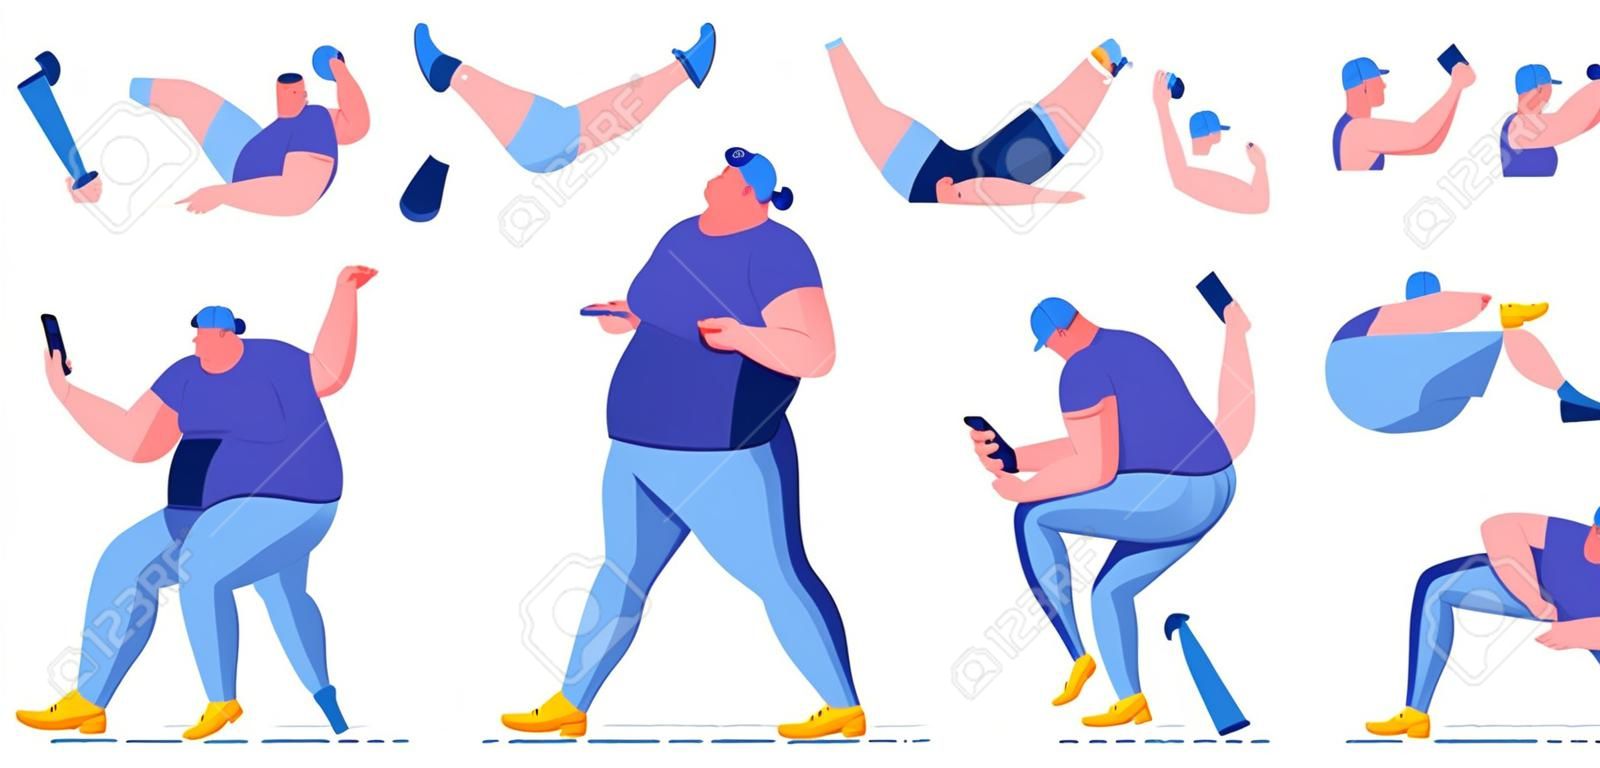 Overweight Man Creation Kit Flat Cartoon Vector Illustration. Body Parts for Animation such as Head, Arms and Legs. Different Positions and Gestures. Hands Holding Box, Wrench, Mobile Phone.